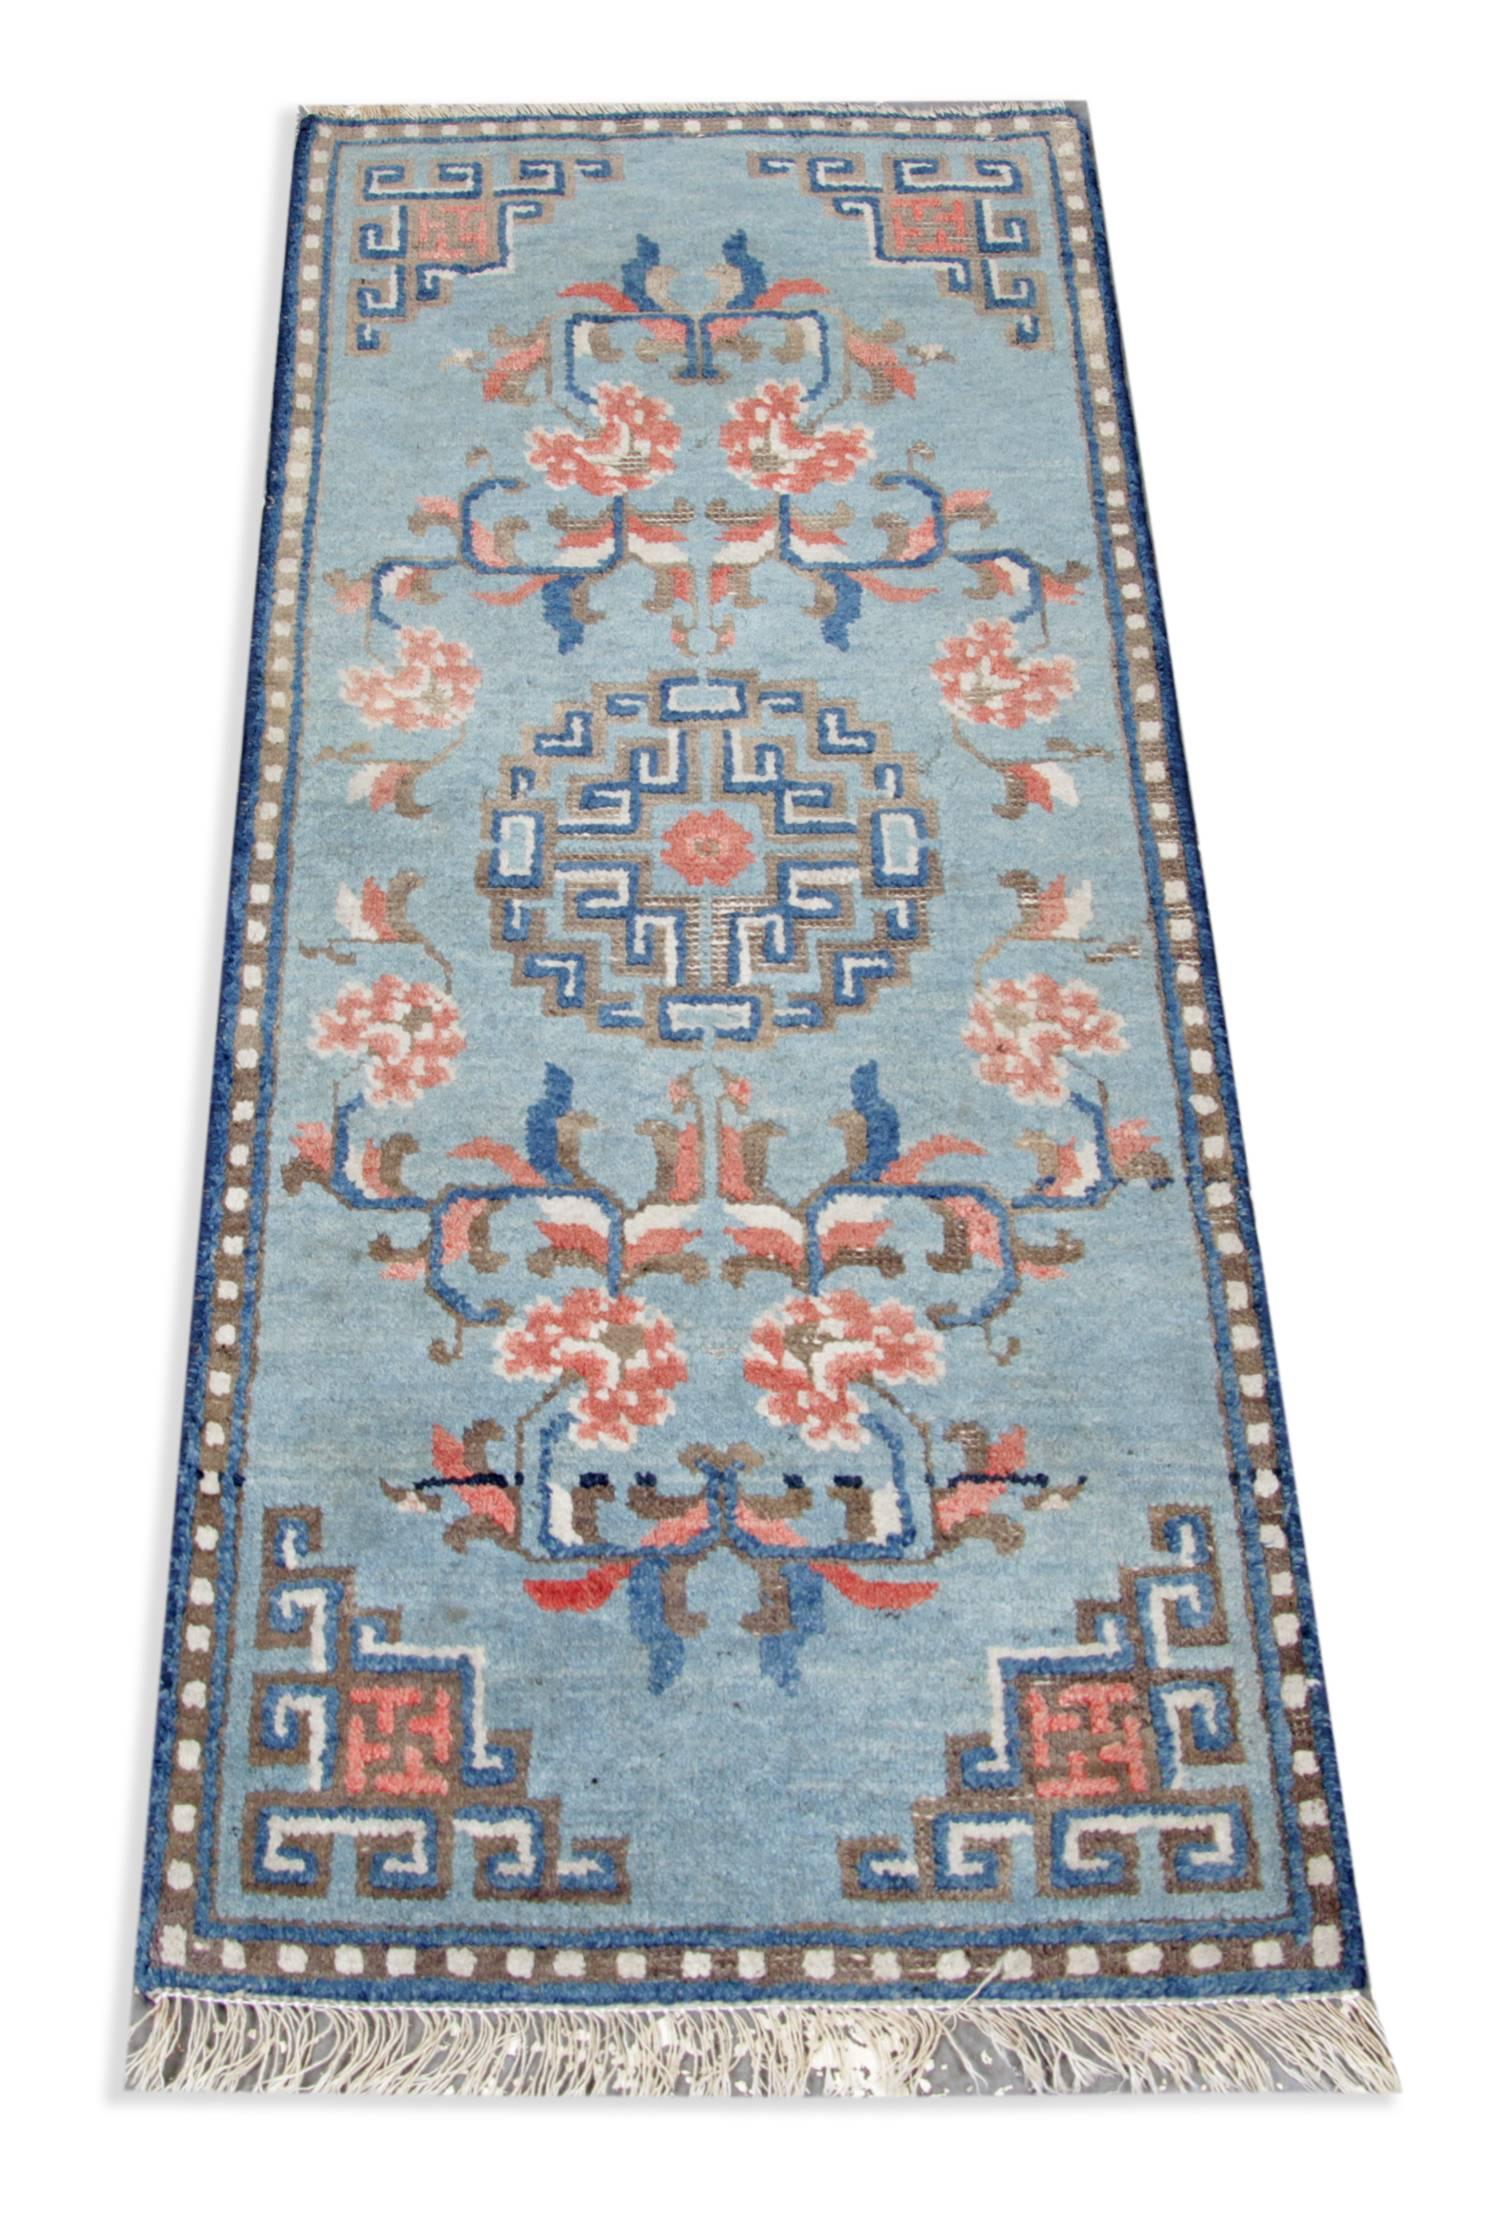 Oriental carpet antique Chinese rugs with a great color combination. These Chinese runner rugs are very beautifully patterned rugs made in China with hand-spun wool and cotton. a woven rug which has lots of attention in the rug store because of